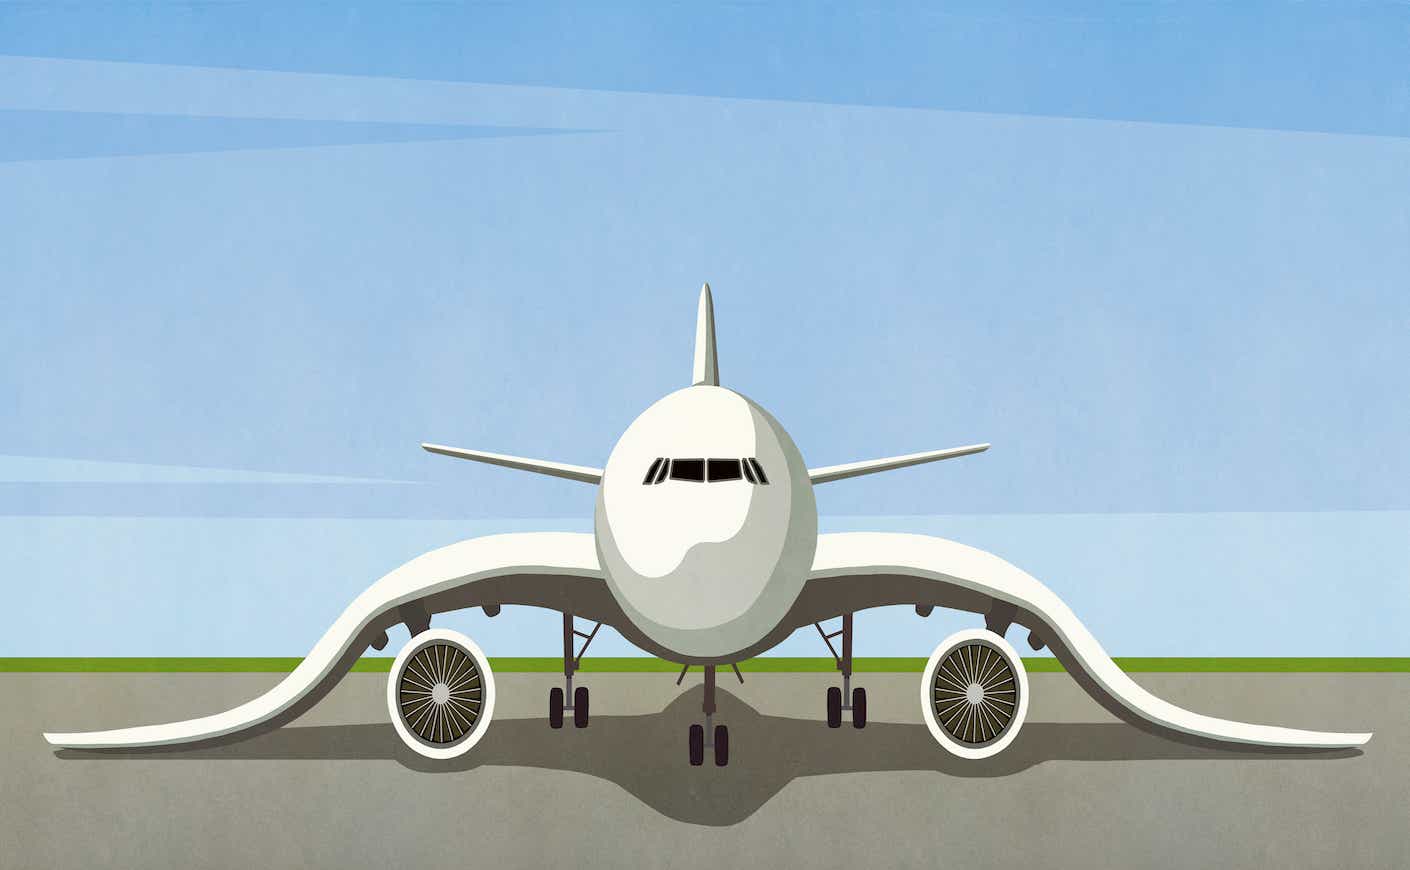 illustration of an Airplane with drooping wings